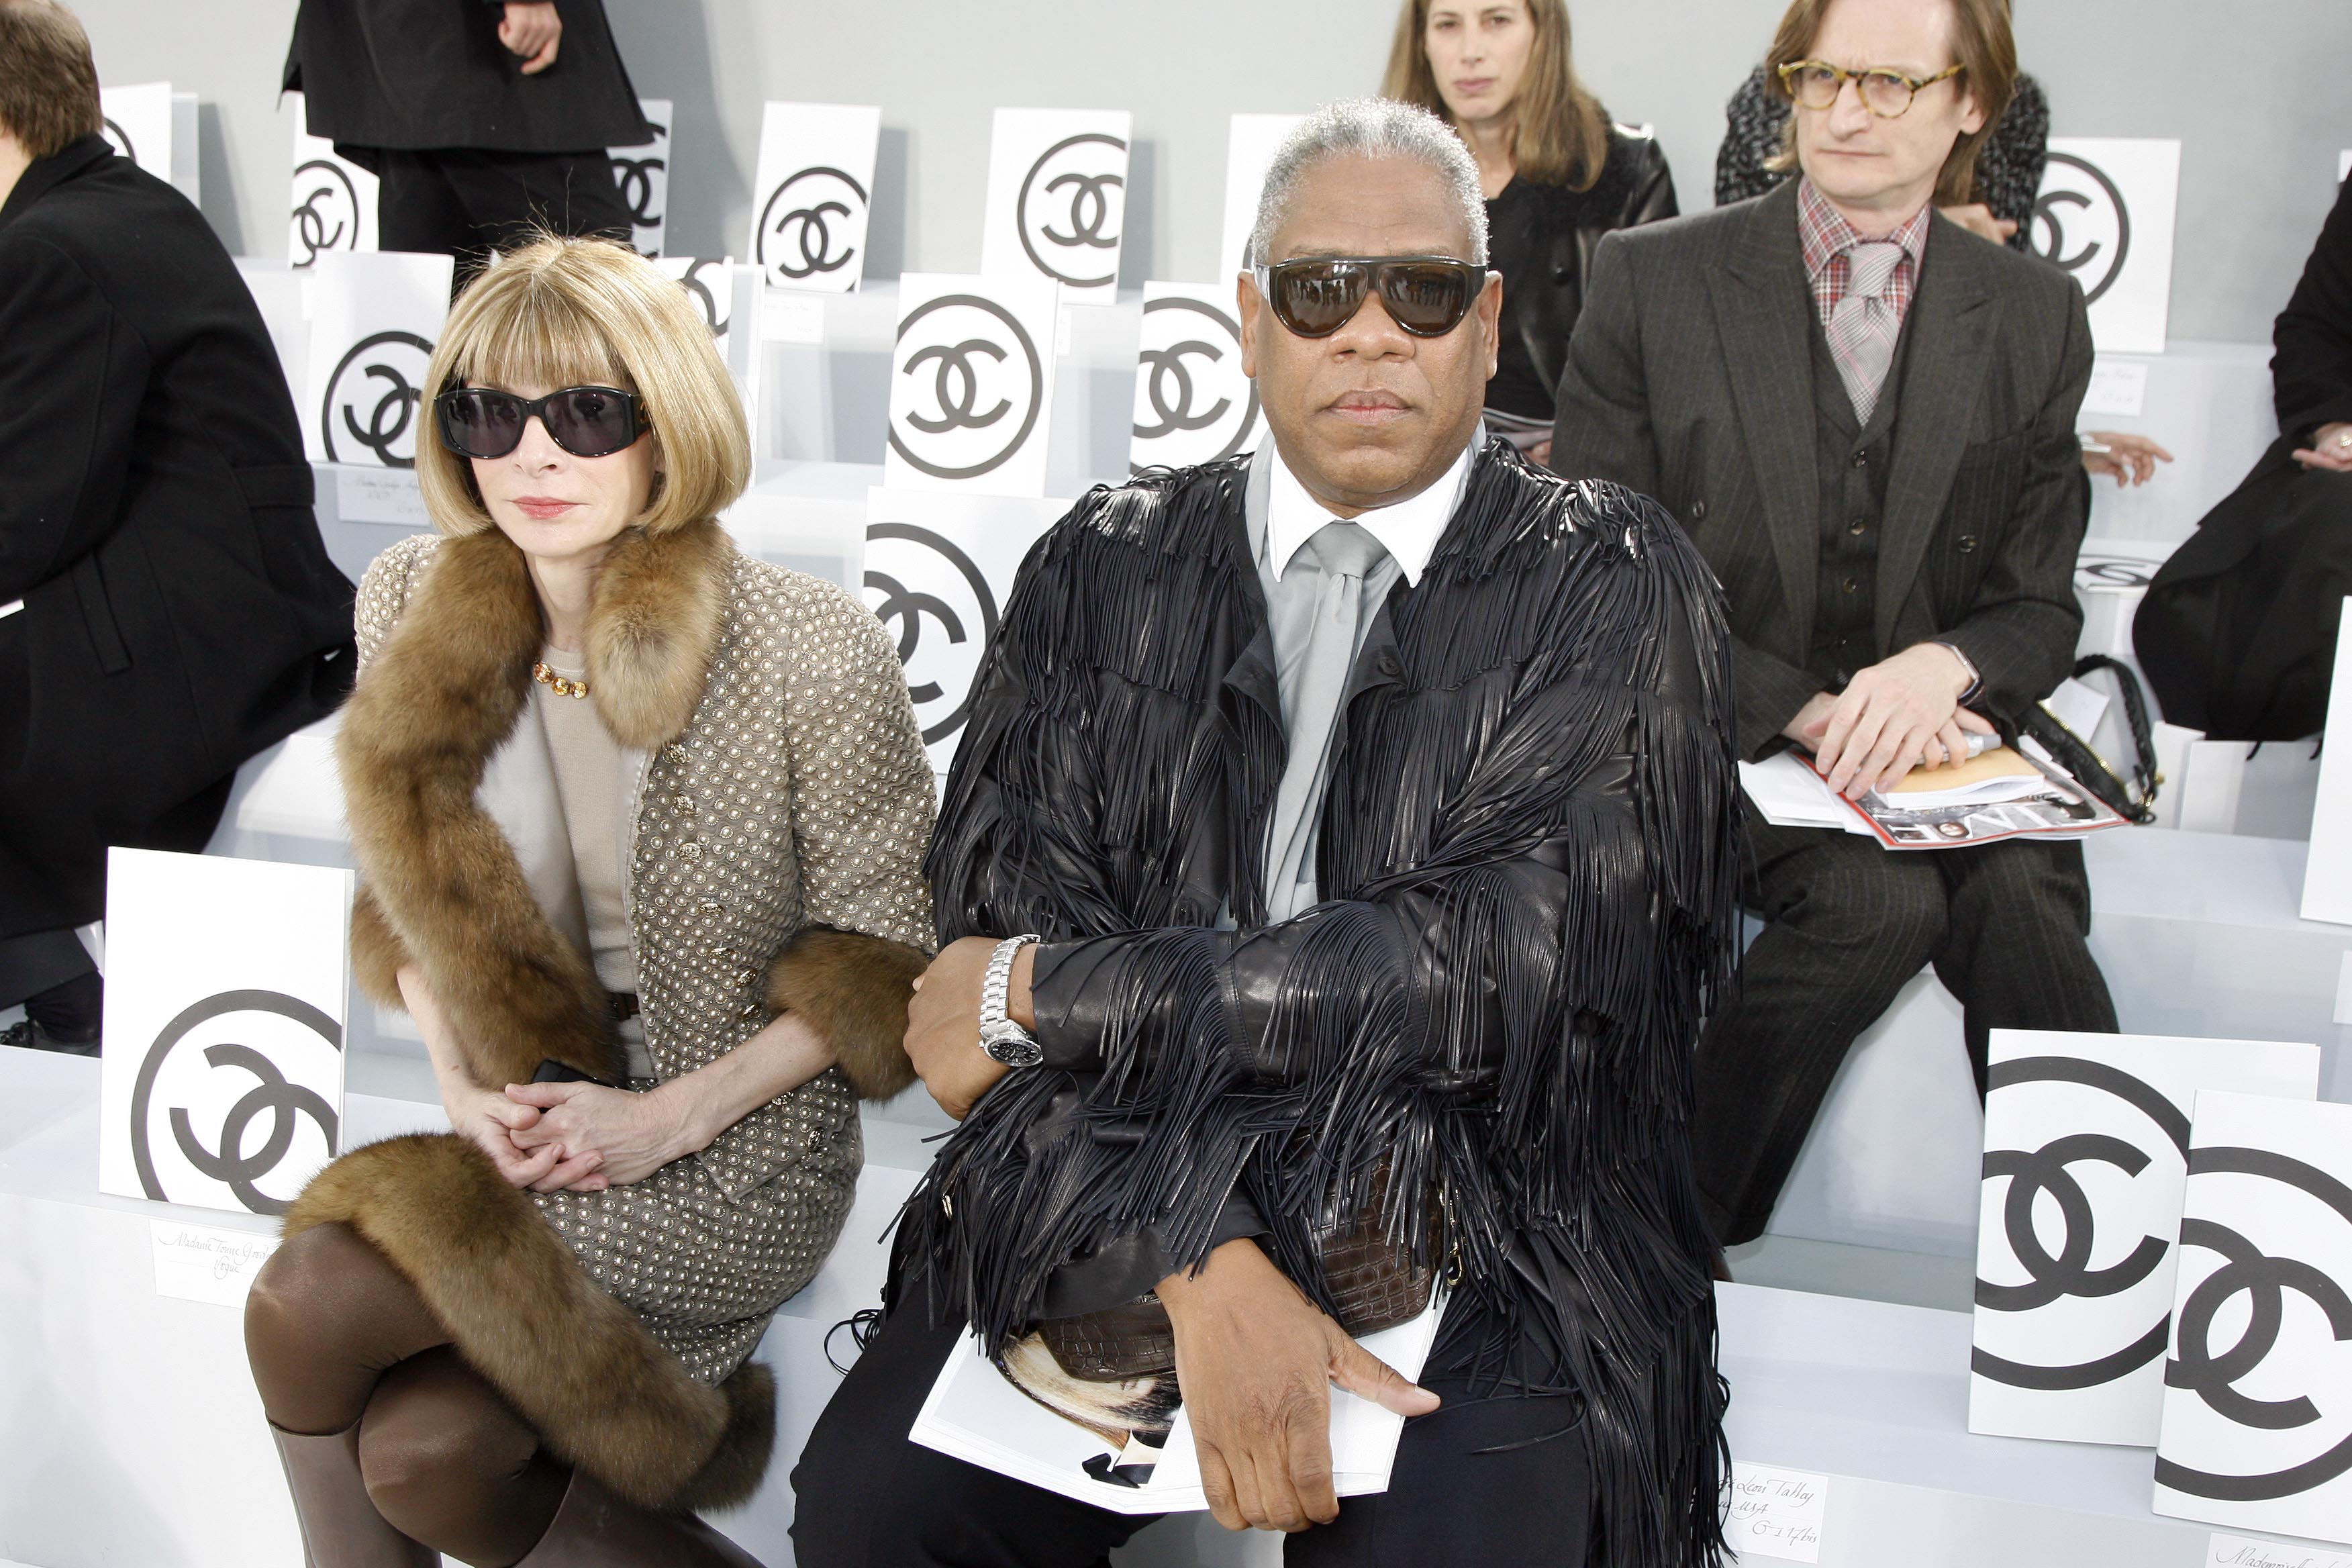 Anna Wintour and Andre Leon Talley sit front row at the 2007-8 fall/winter Chanel fashion show during Paris Fashion Week on March 2, 2007. (Michel Dufour—WireImage)